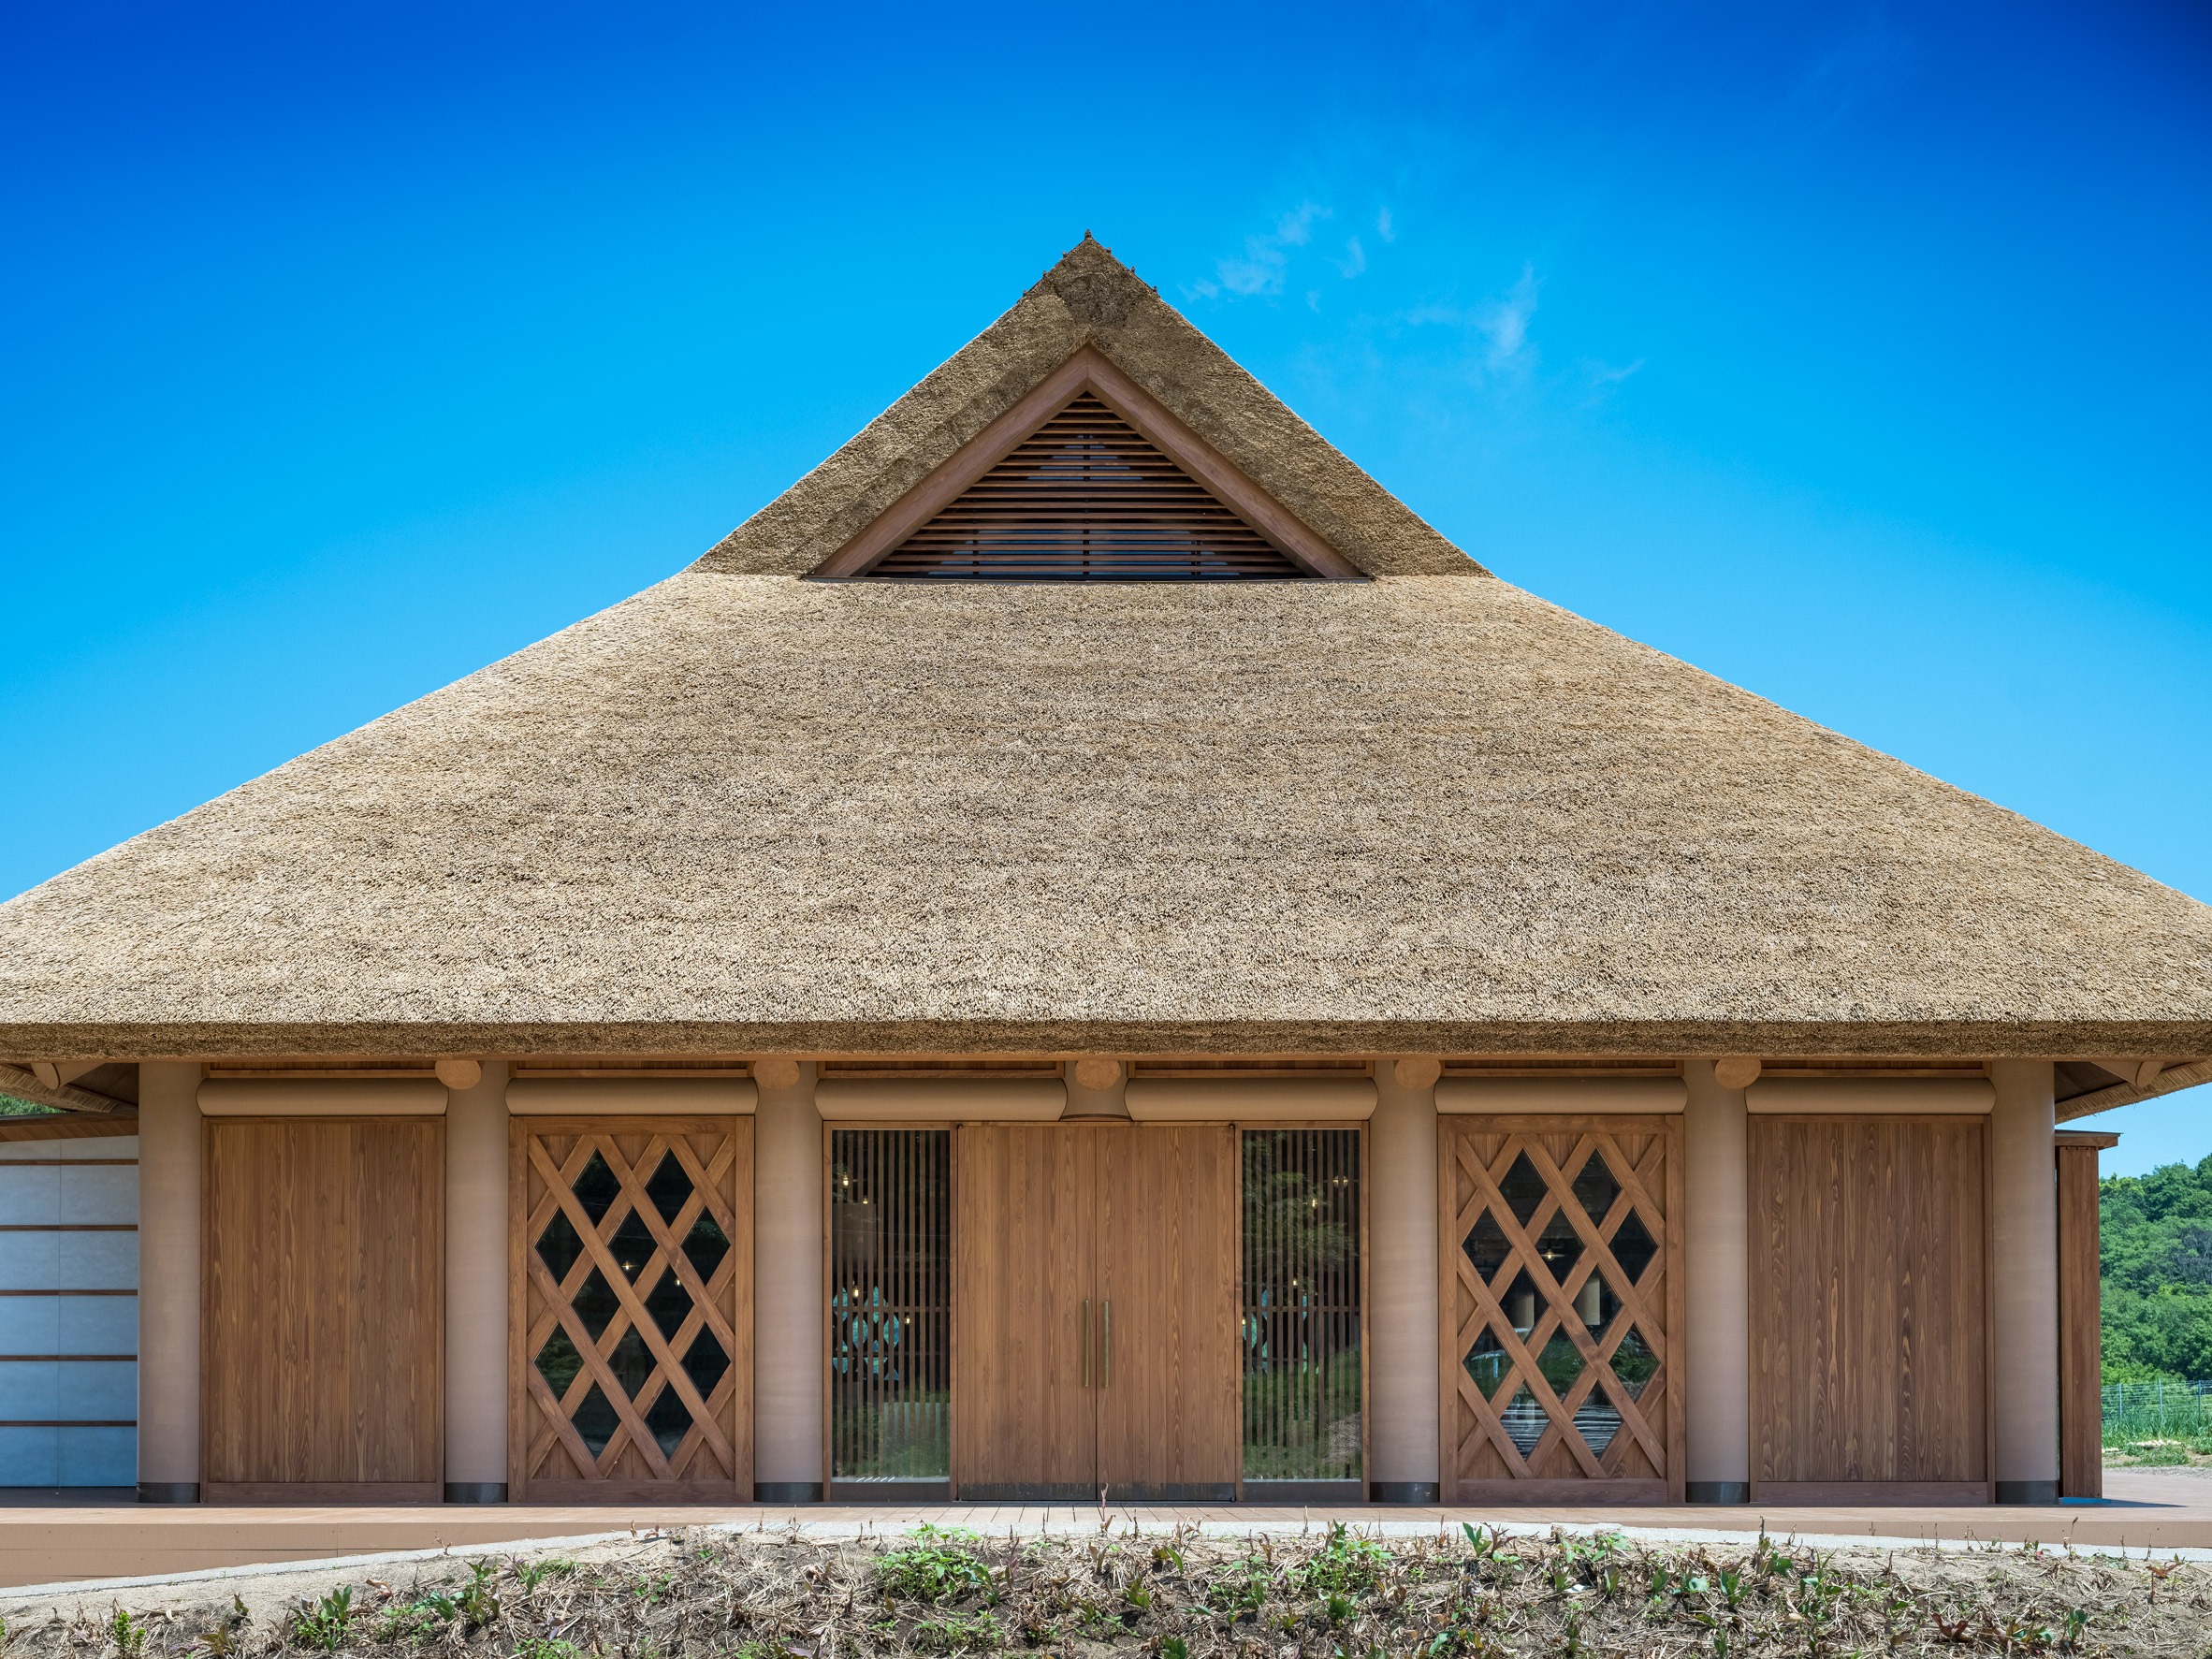 Thatched-roof restaurant by Shigeru Ban Architects 